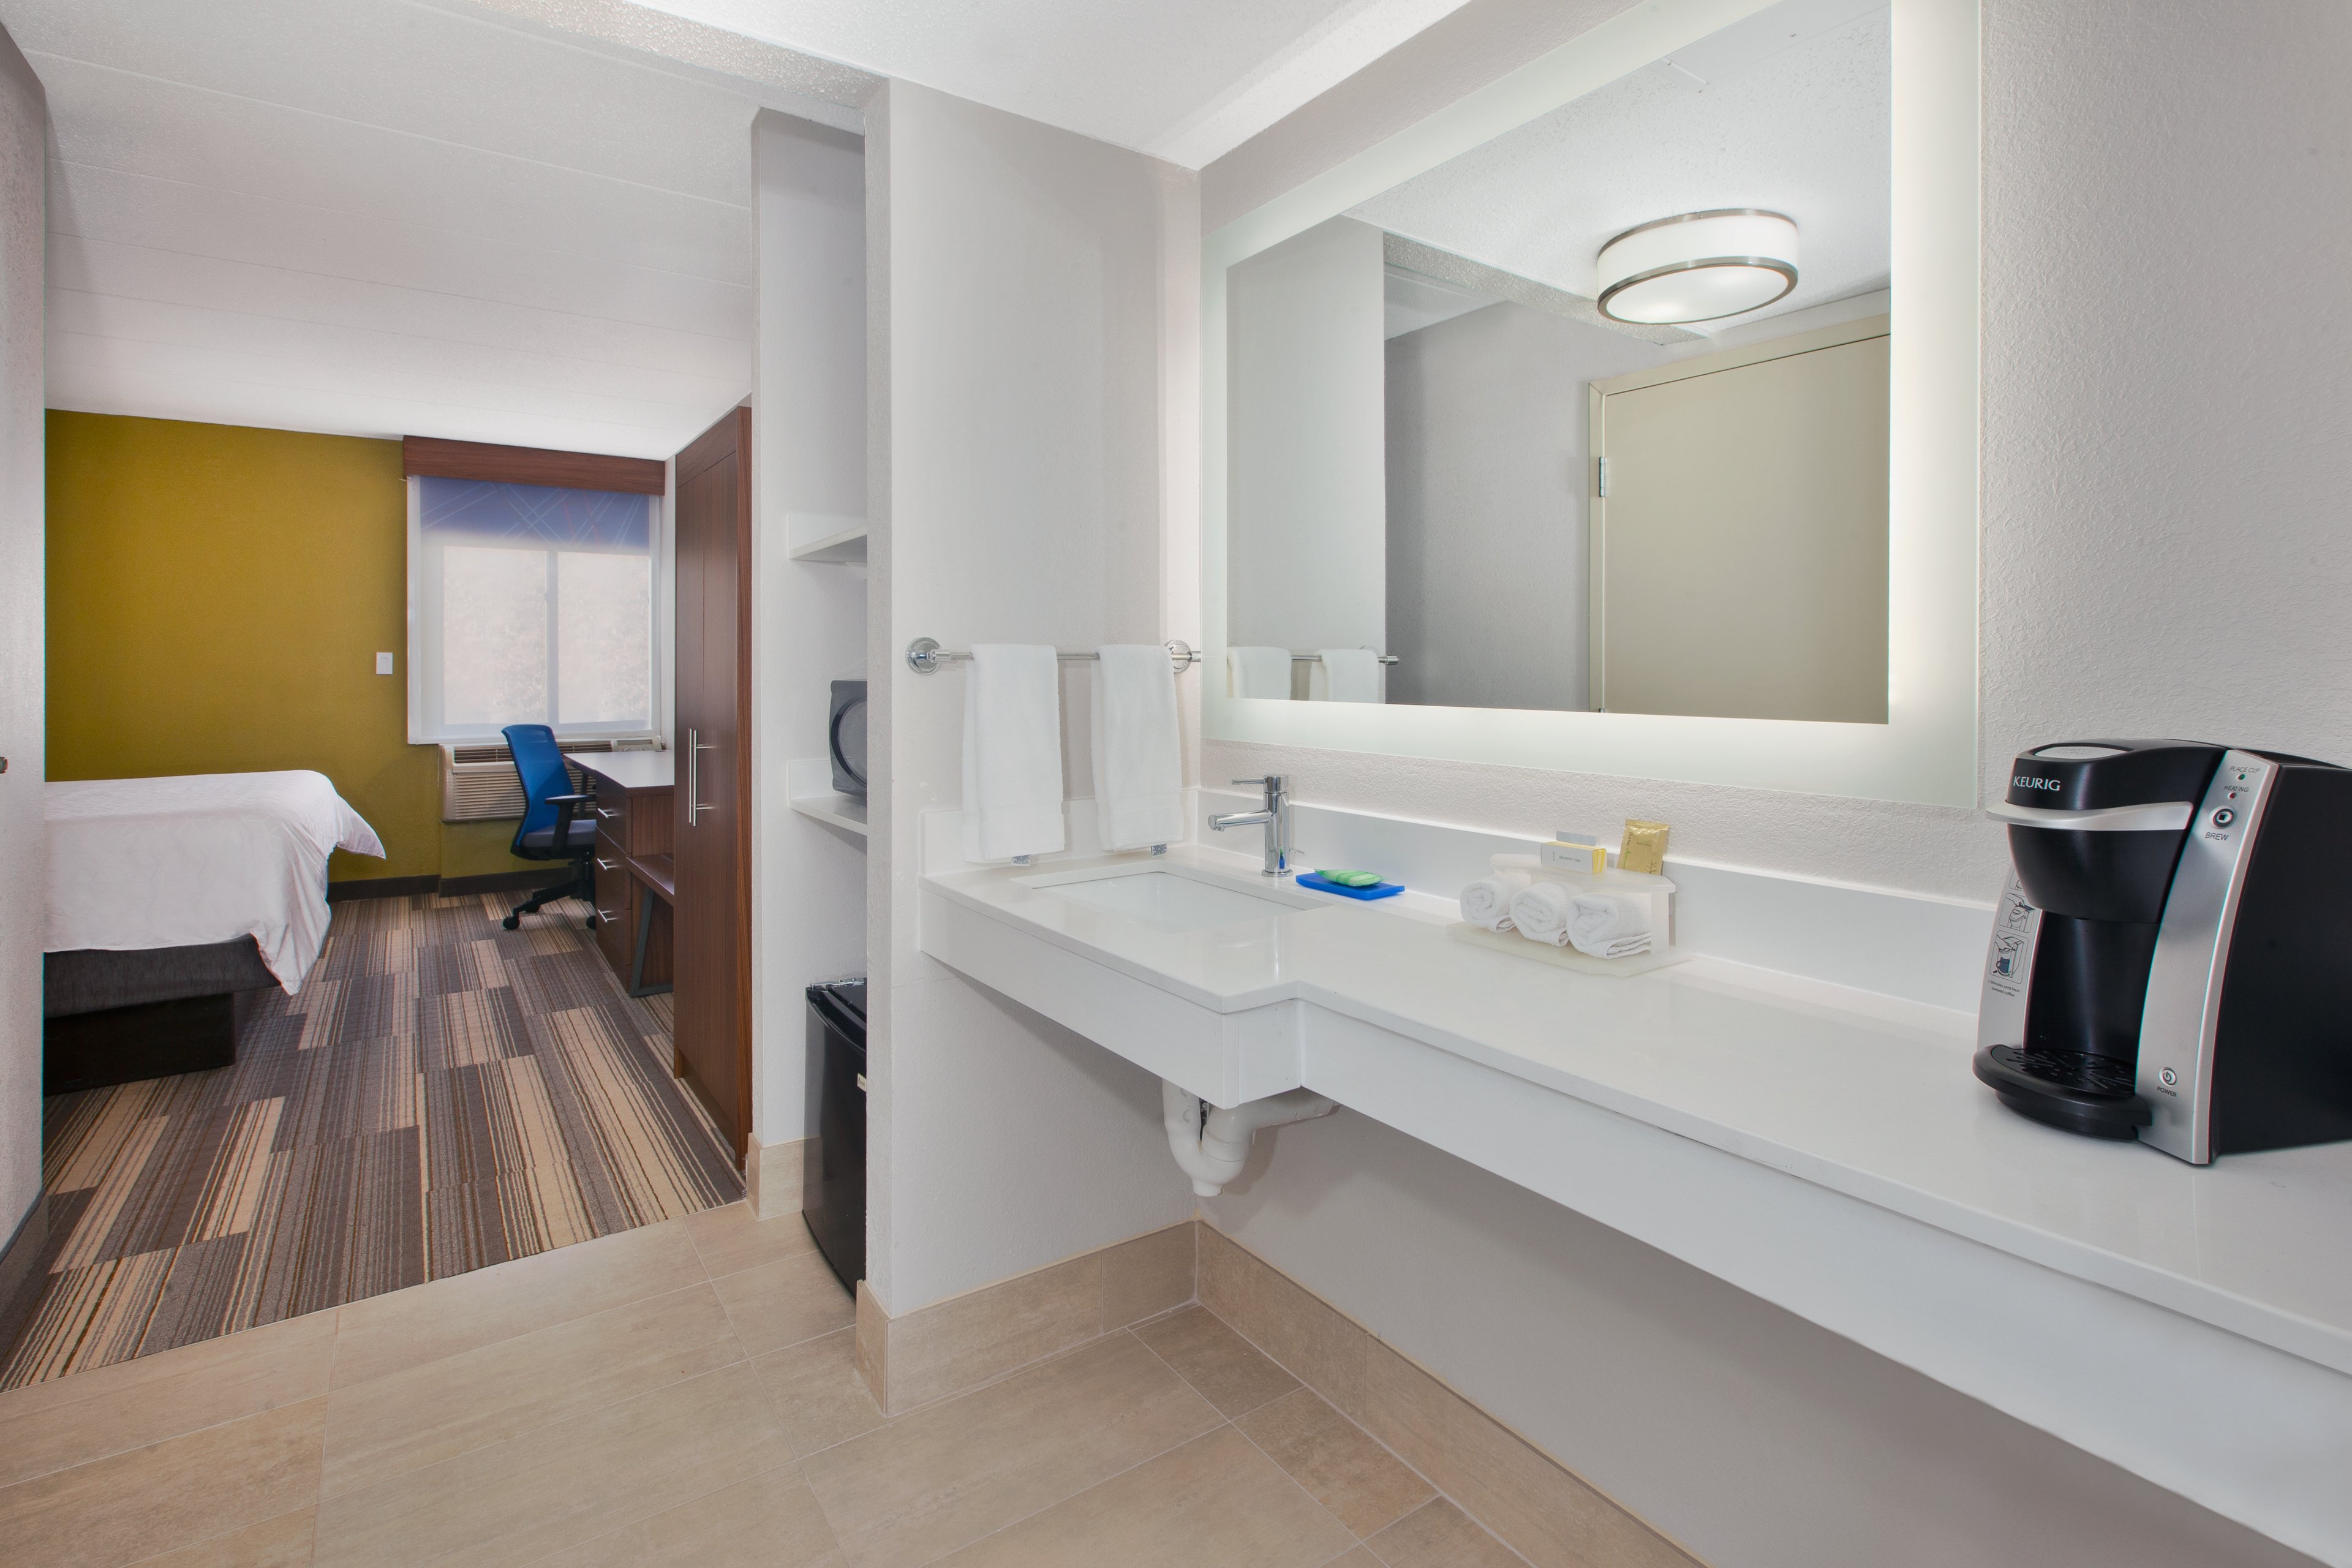 Feel at ease in our spacious and well lit ADA bathroom.